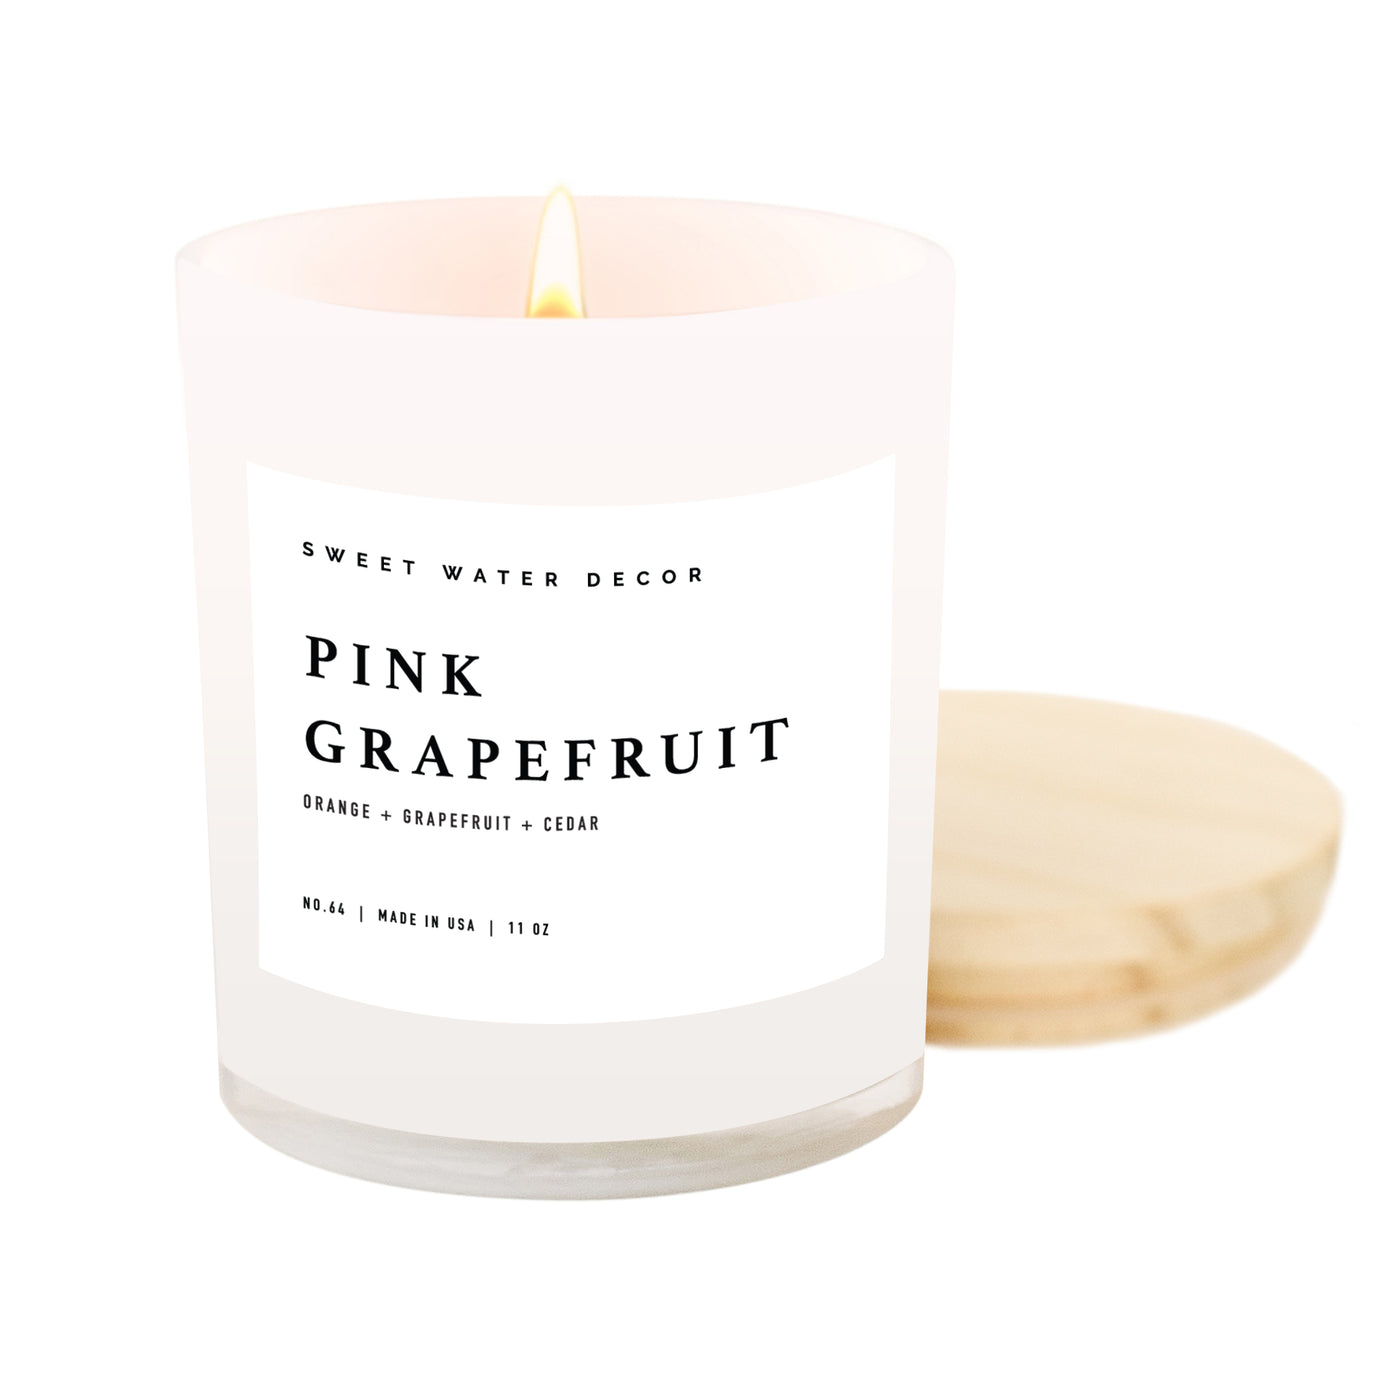 Pink Grapefruit Soy Candle - White Jar - 11 oz - Sweet Water Decor - Candles